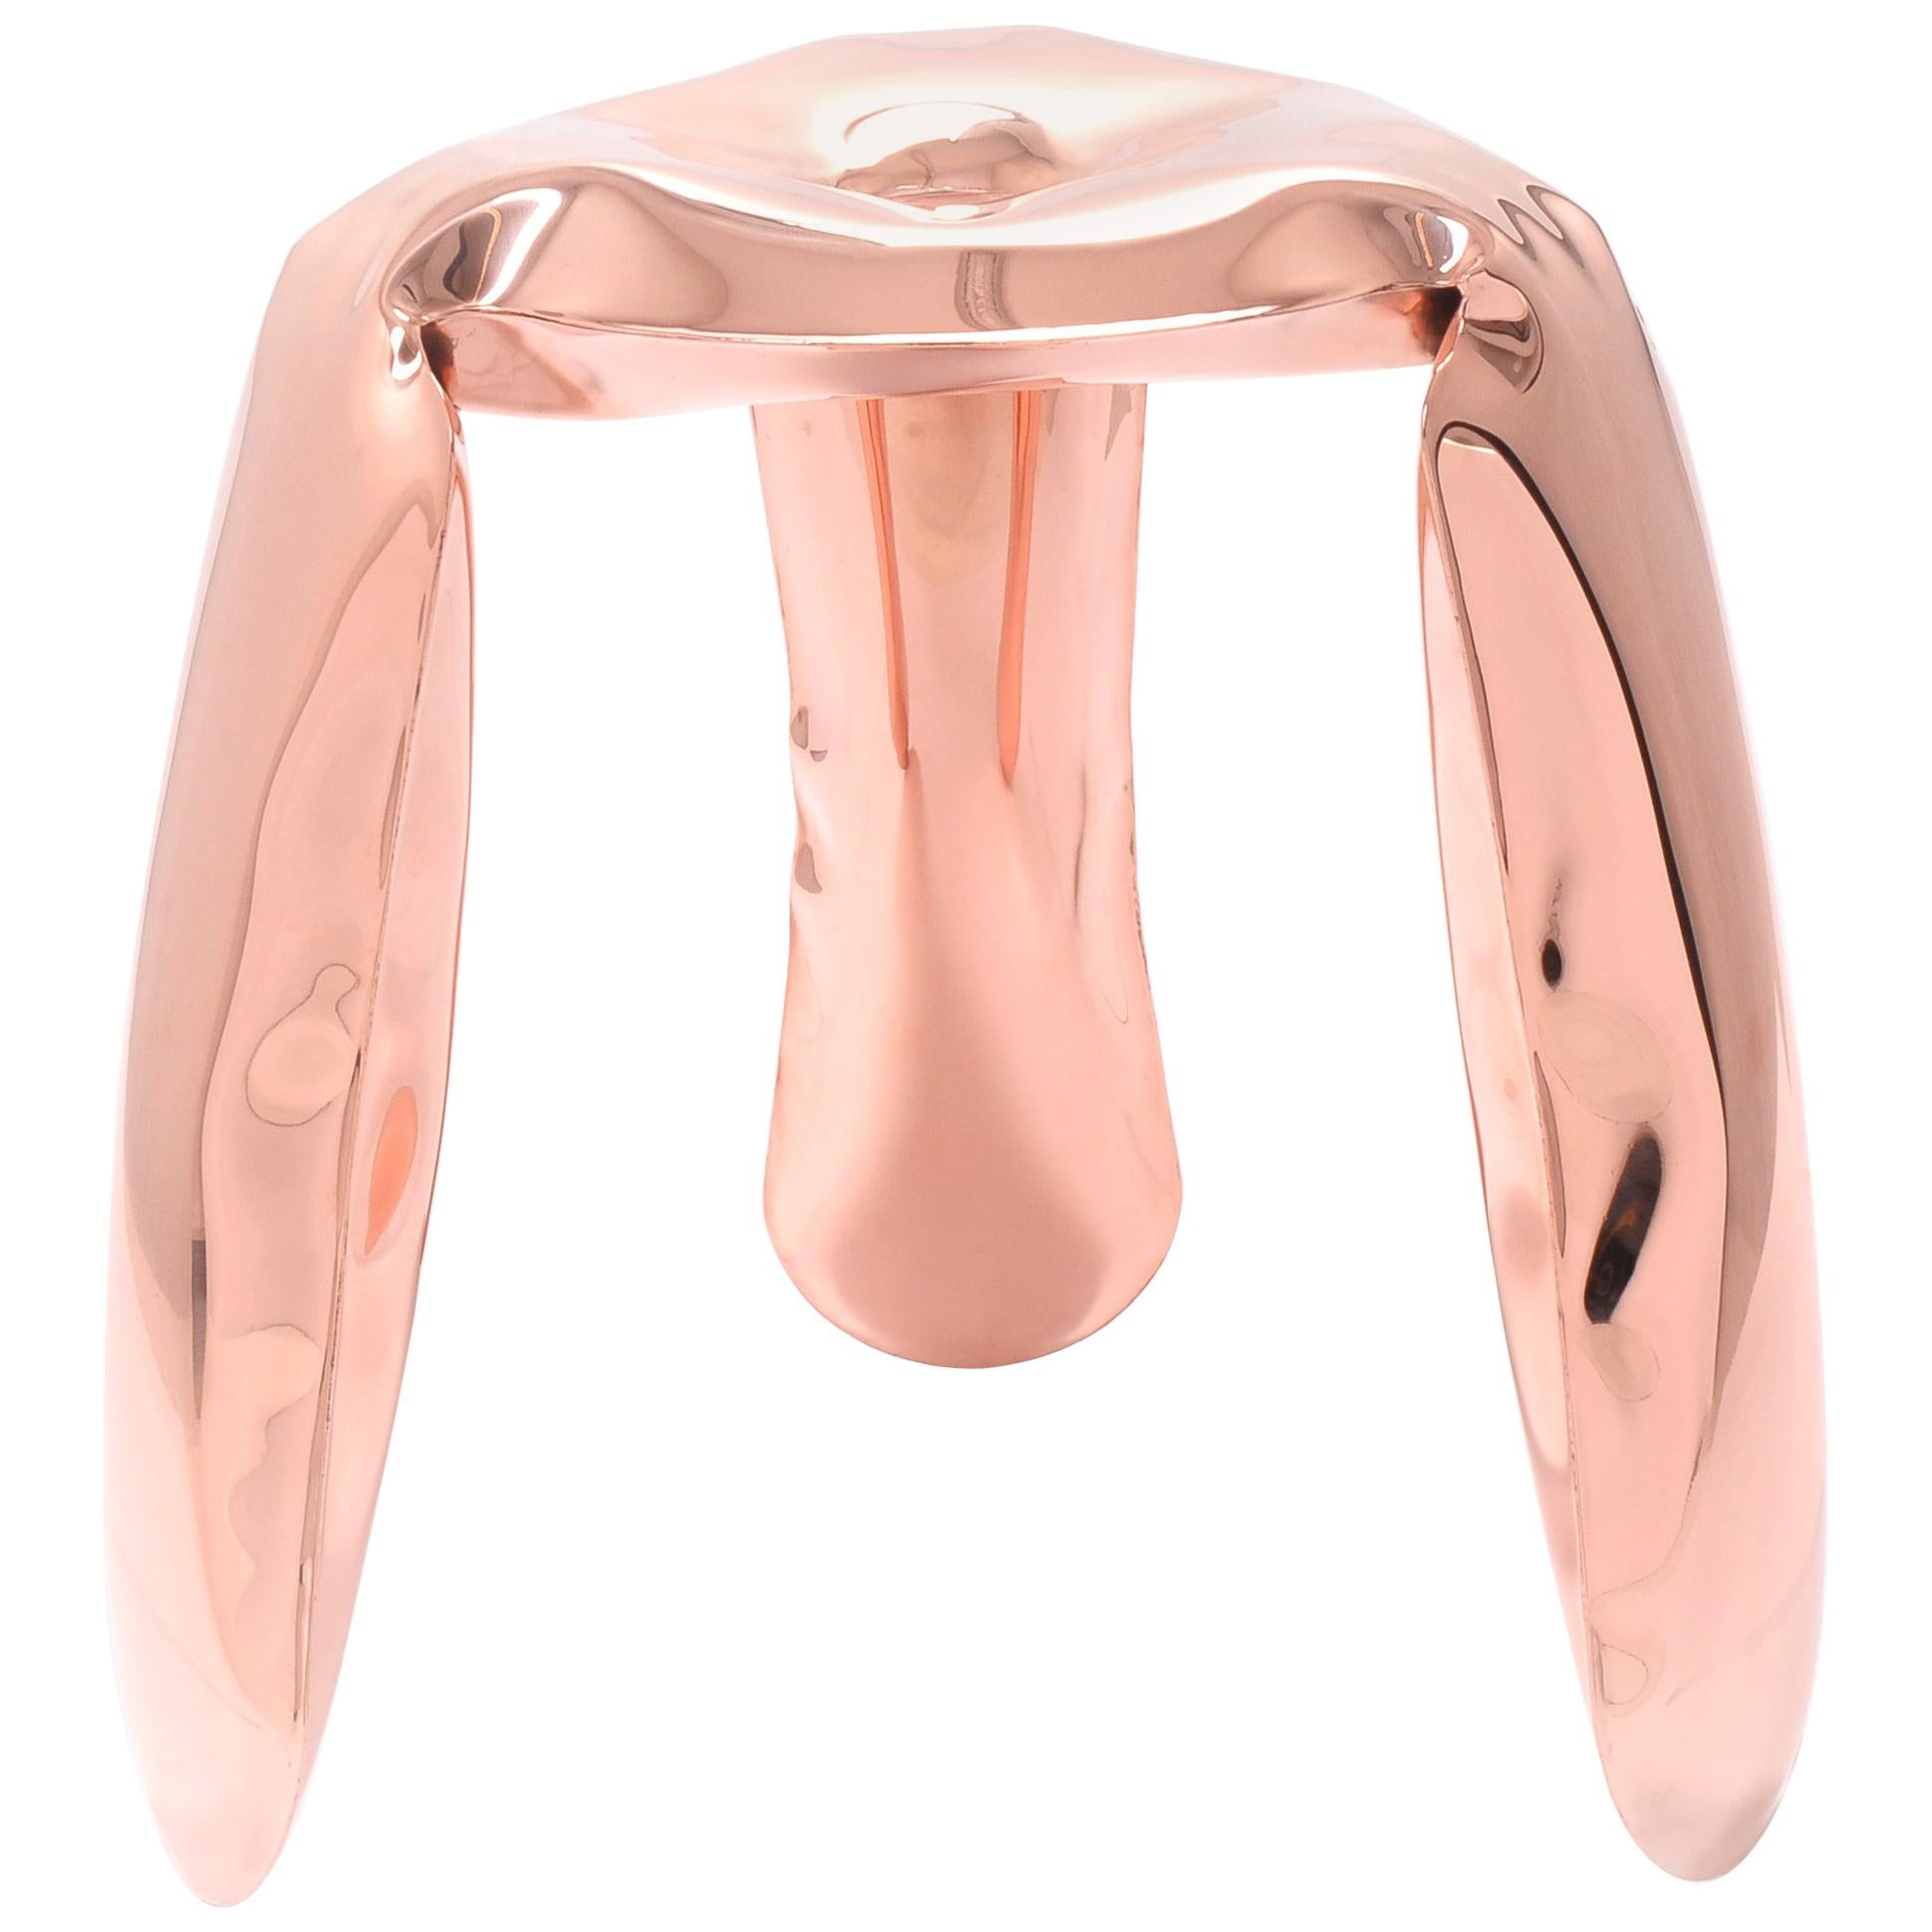 Limited Edition Plopp Standard Stool in Polished Copper by Zieta For Sale